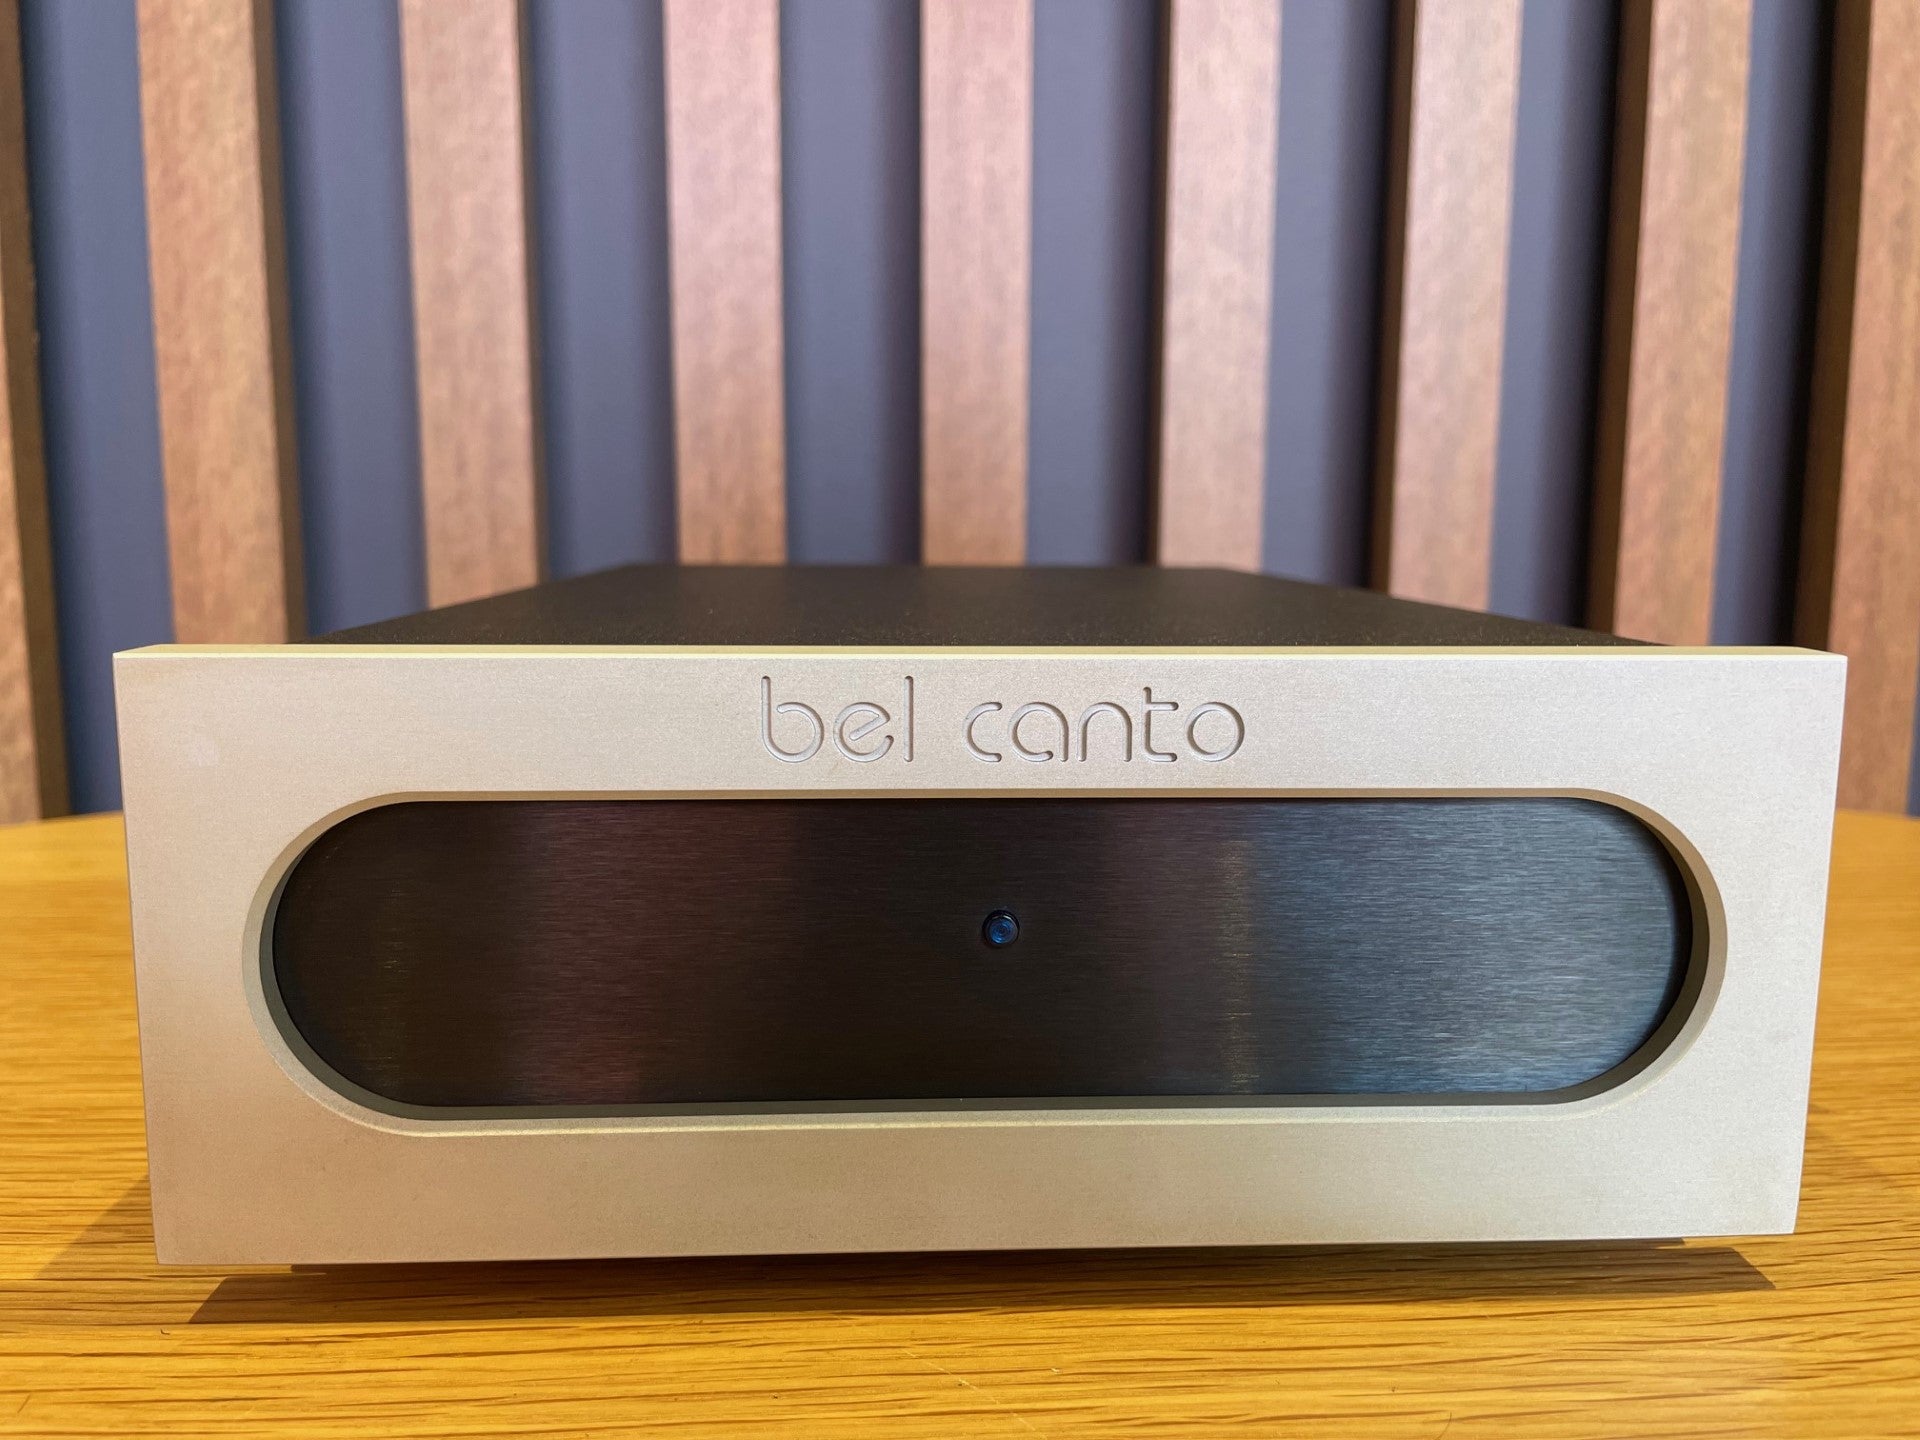 Bel Canto e.One REF500S Power Amplifier - Consignment